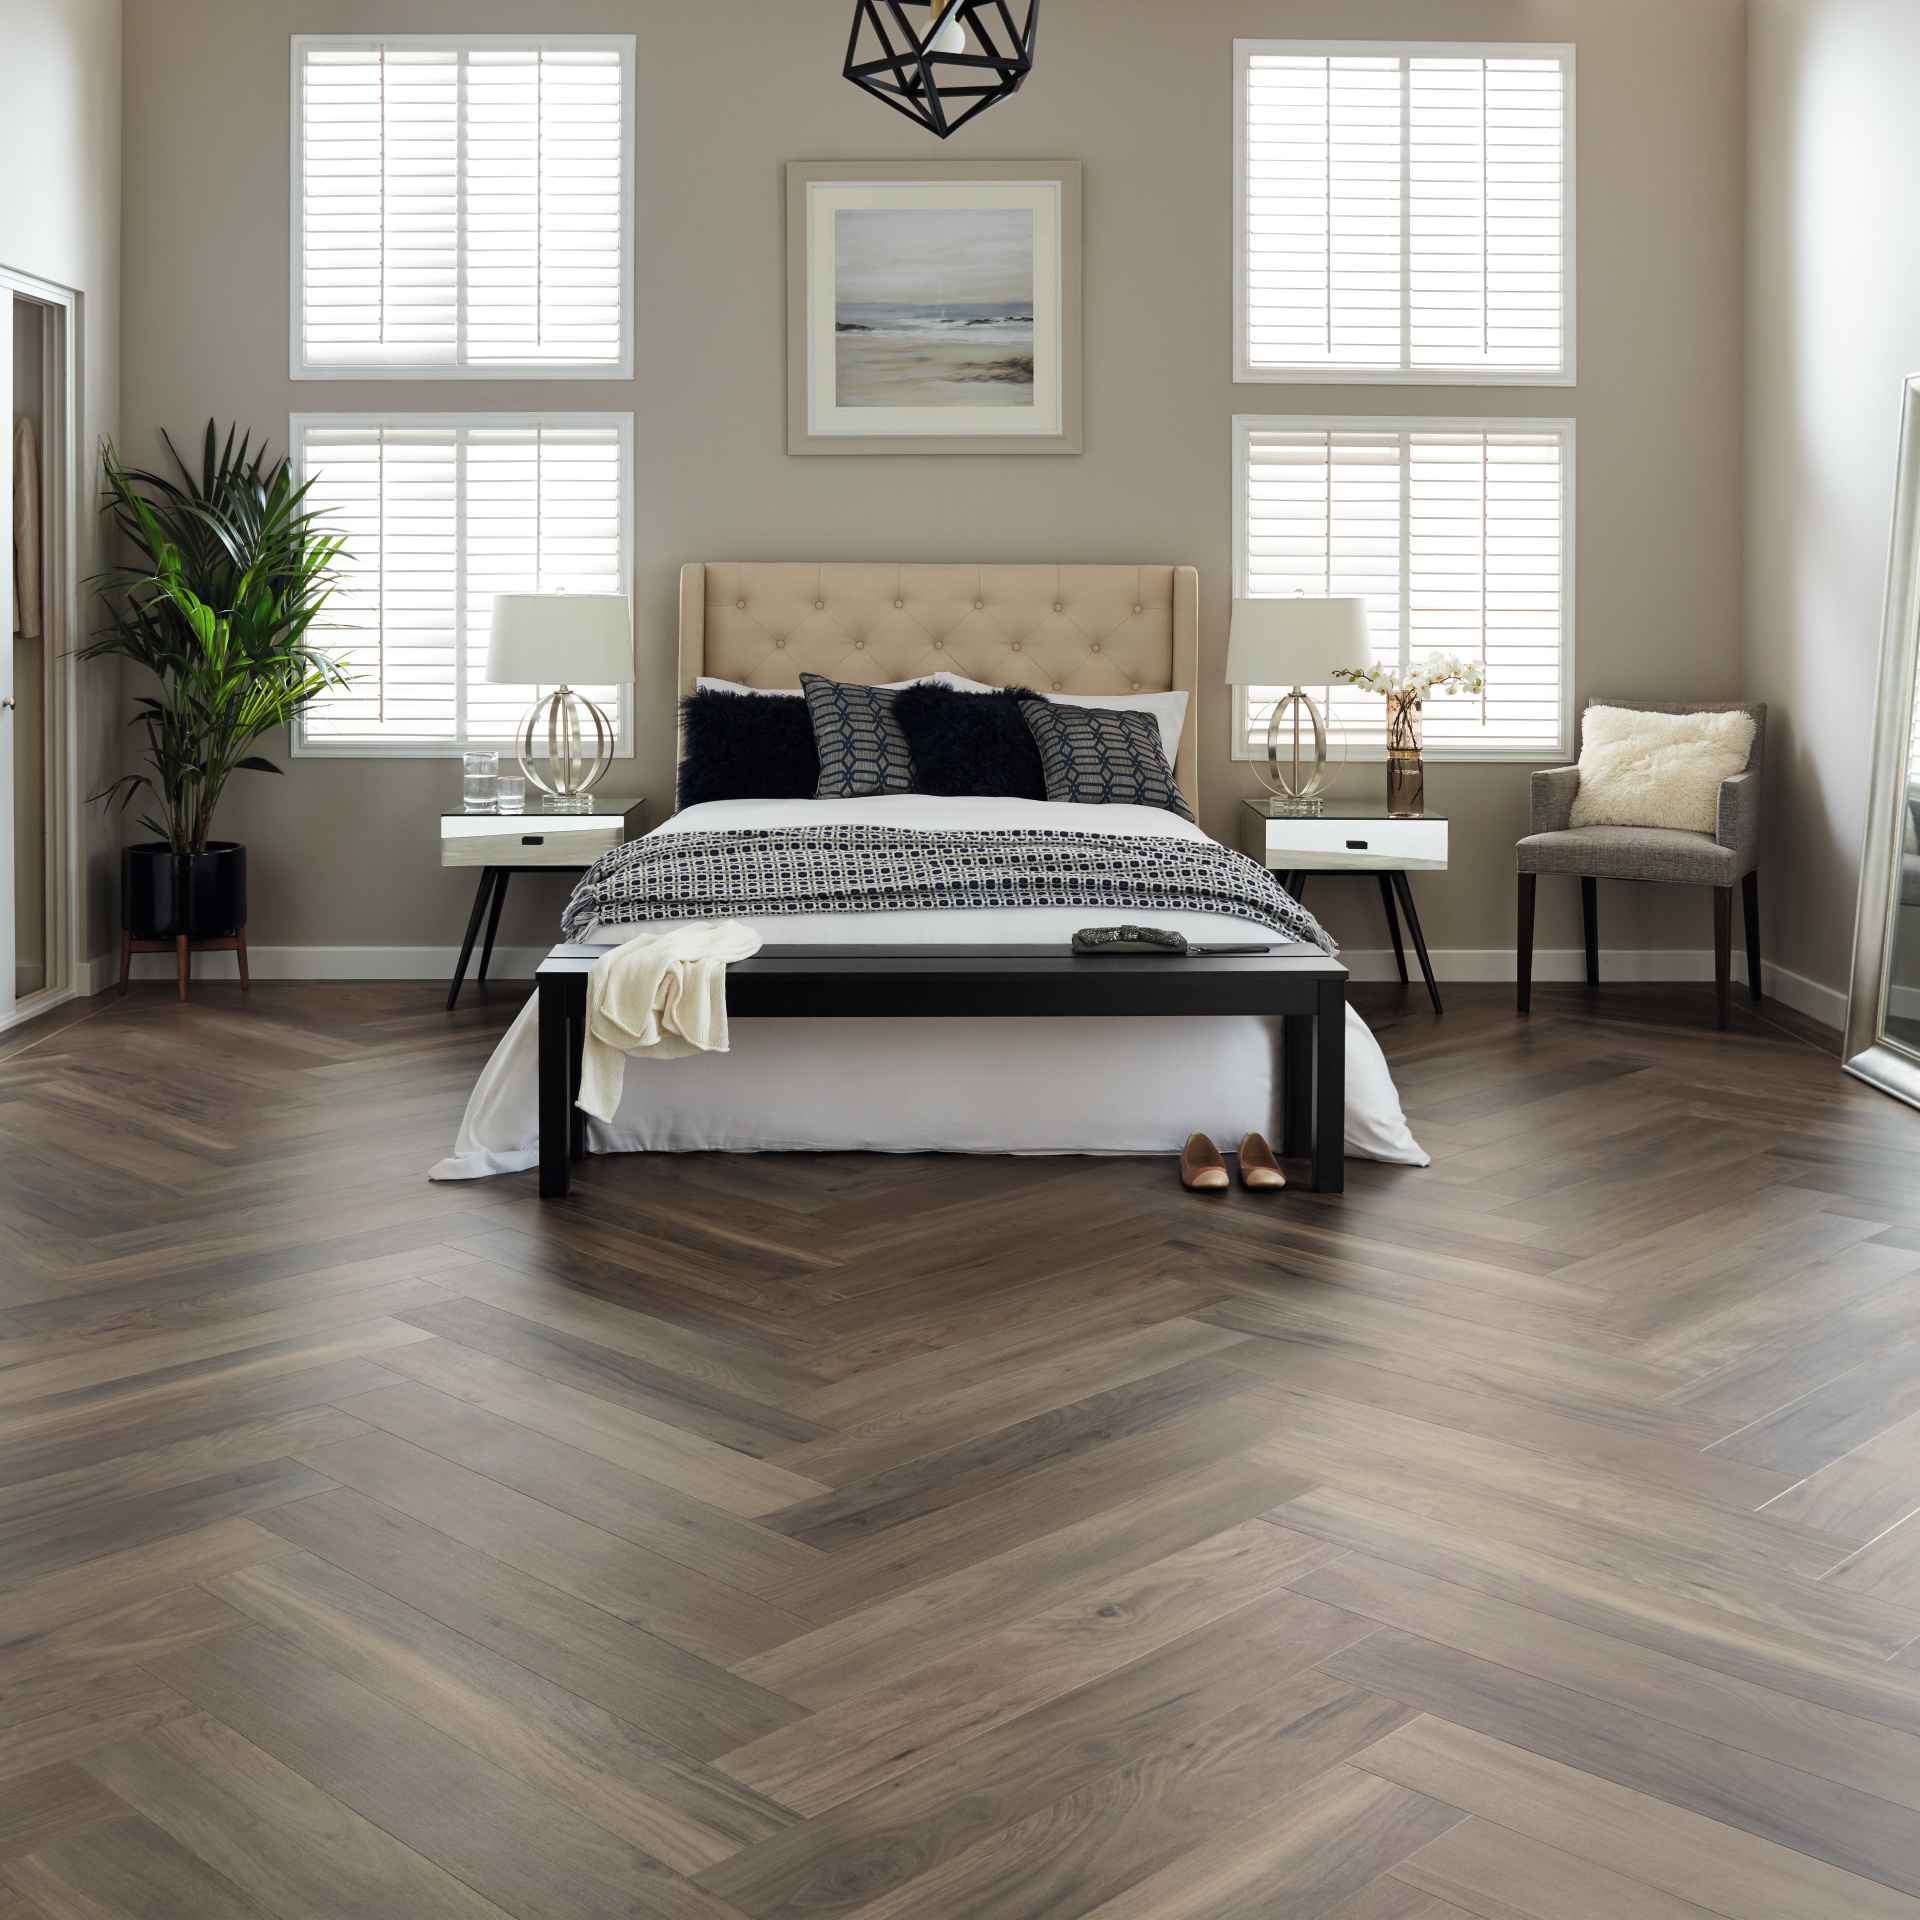 Washed Walnut WP328 with DS12 design strips in a bedroom